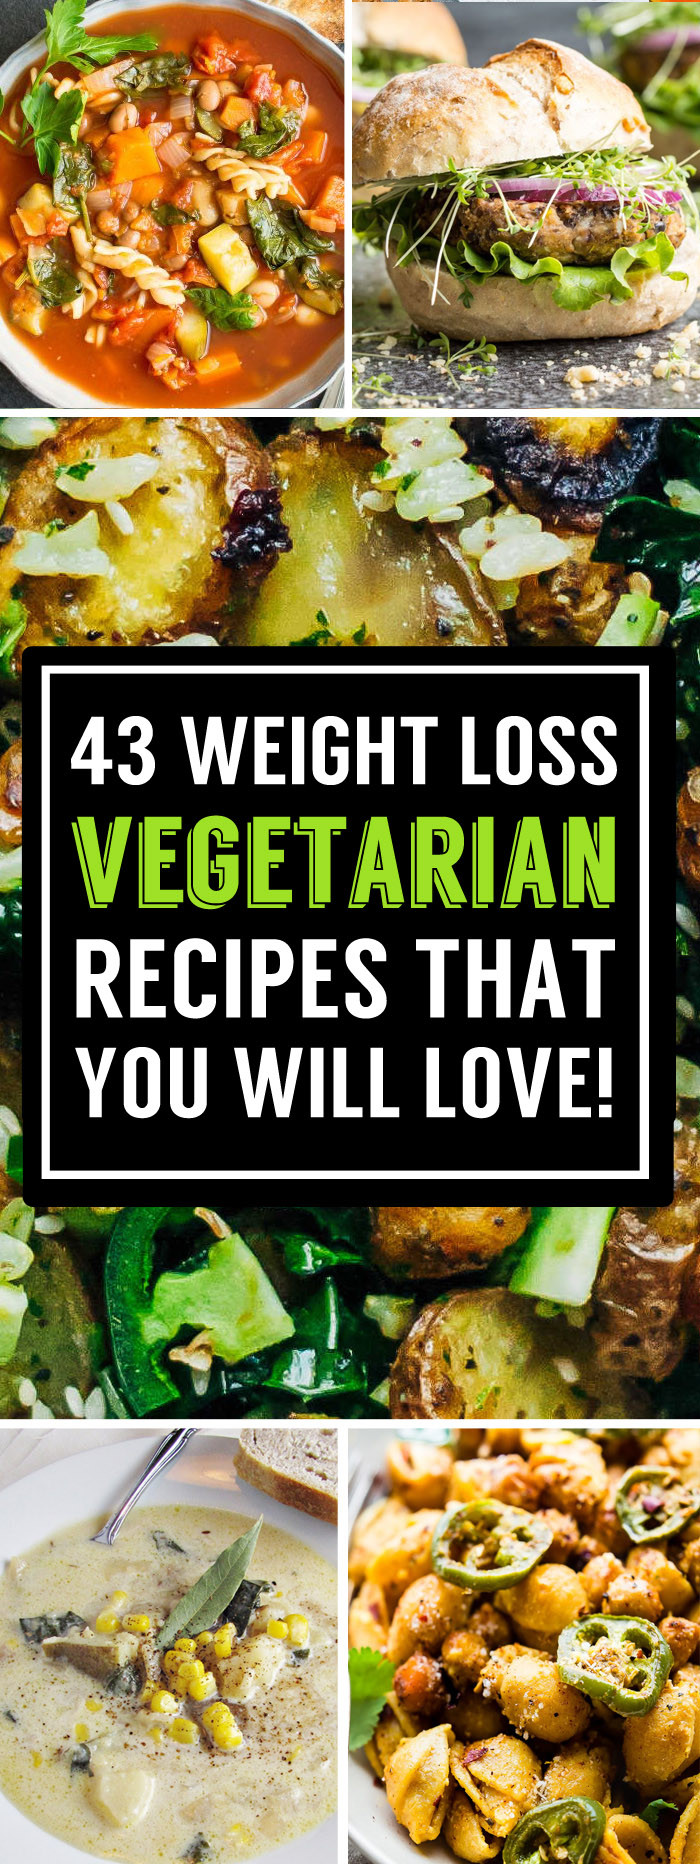 Vegetarian Recipes For Weight Loss
 43 Delicious Ve arian Recipes That Can Help Boost Your